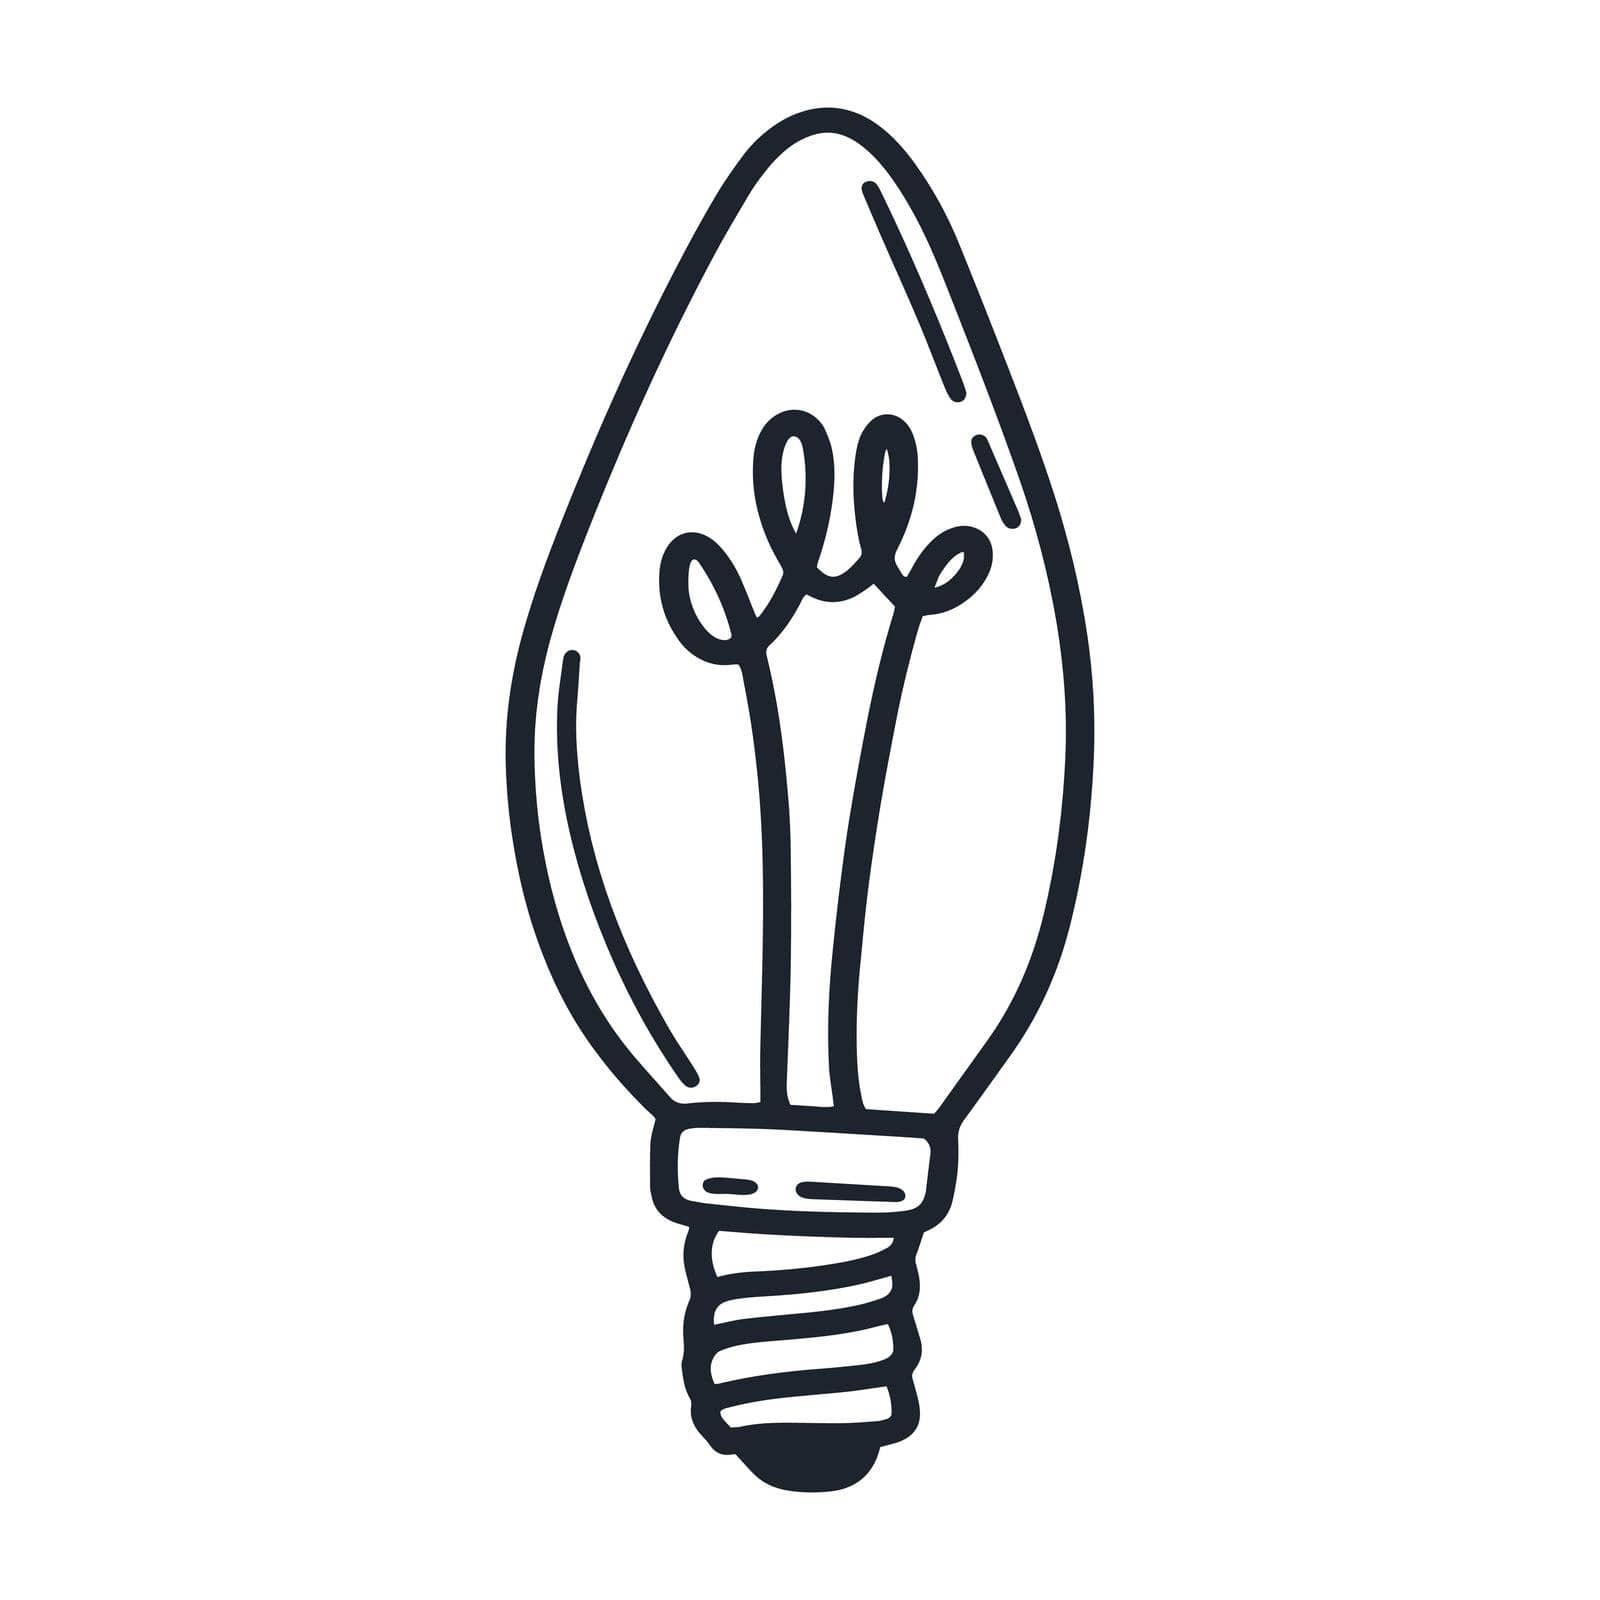 Outstretched lightbulb isolated doodle object by TassiaK